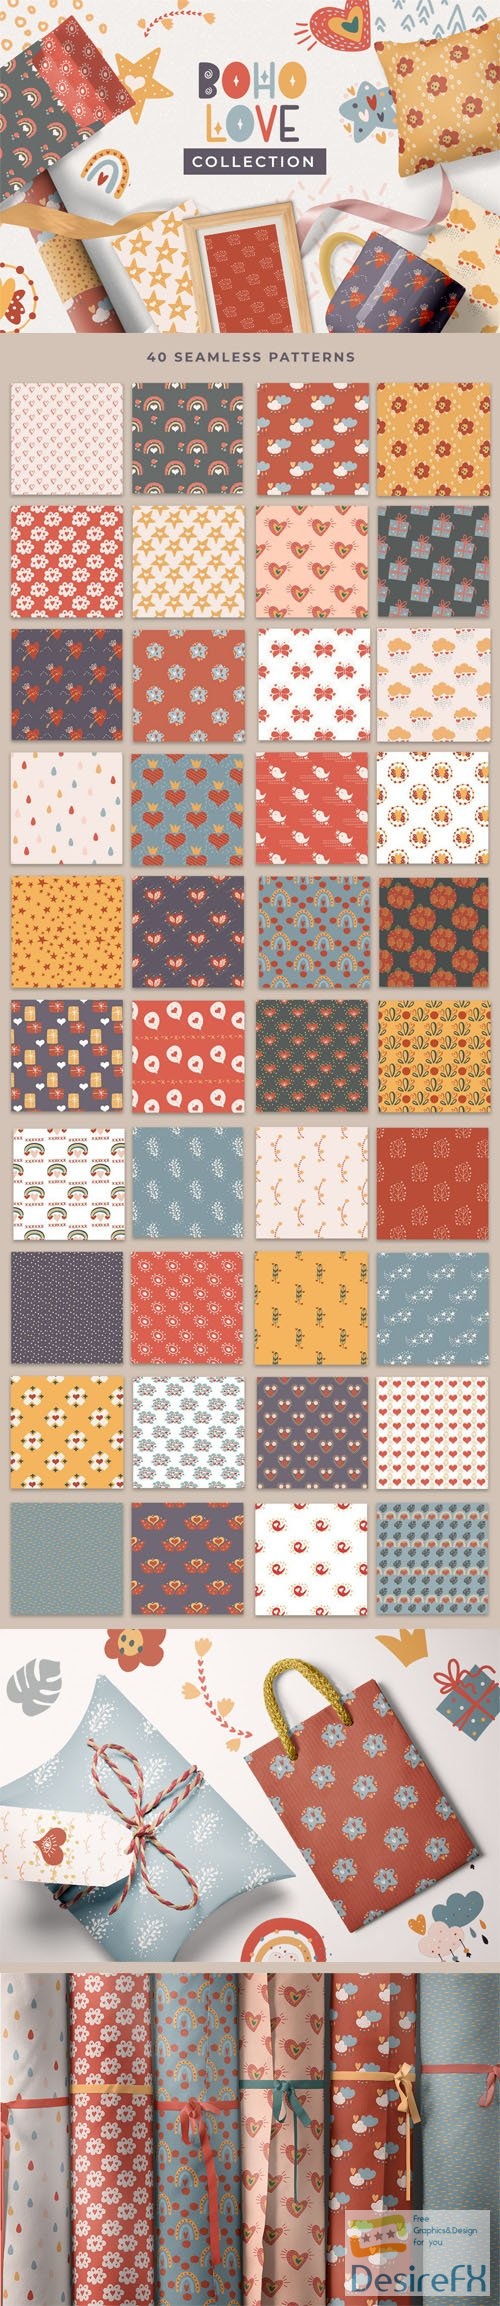 Boho Love Collection - 40 Seamless Patterns